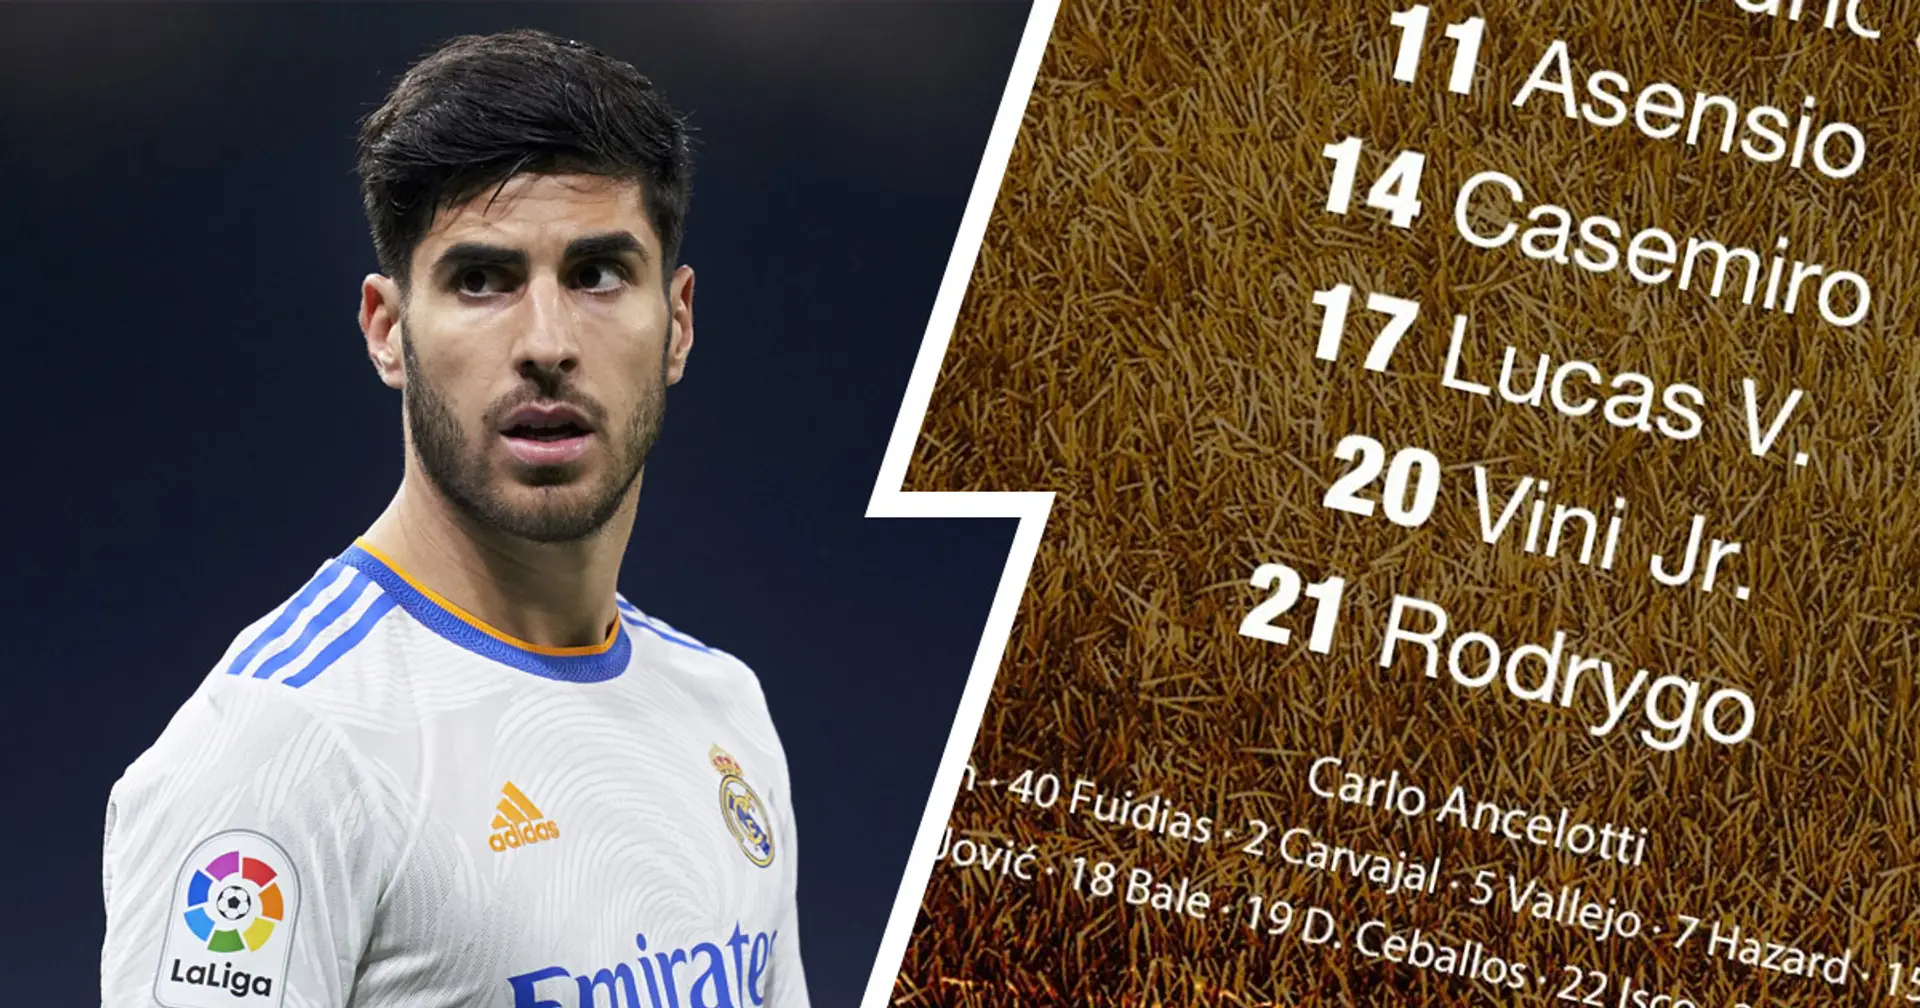 OFFICIAL: Asensio as striker as Real Madrid XI vs Athletic Bilbao unveiled